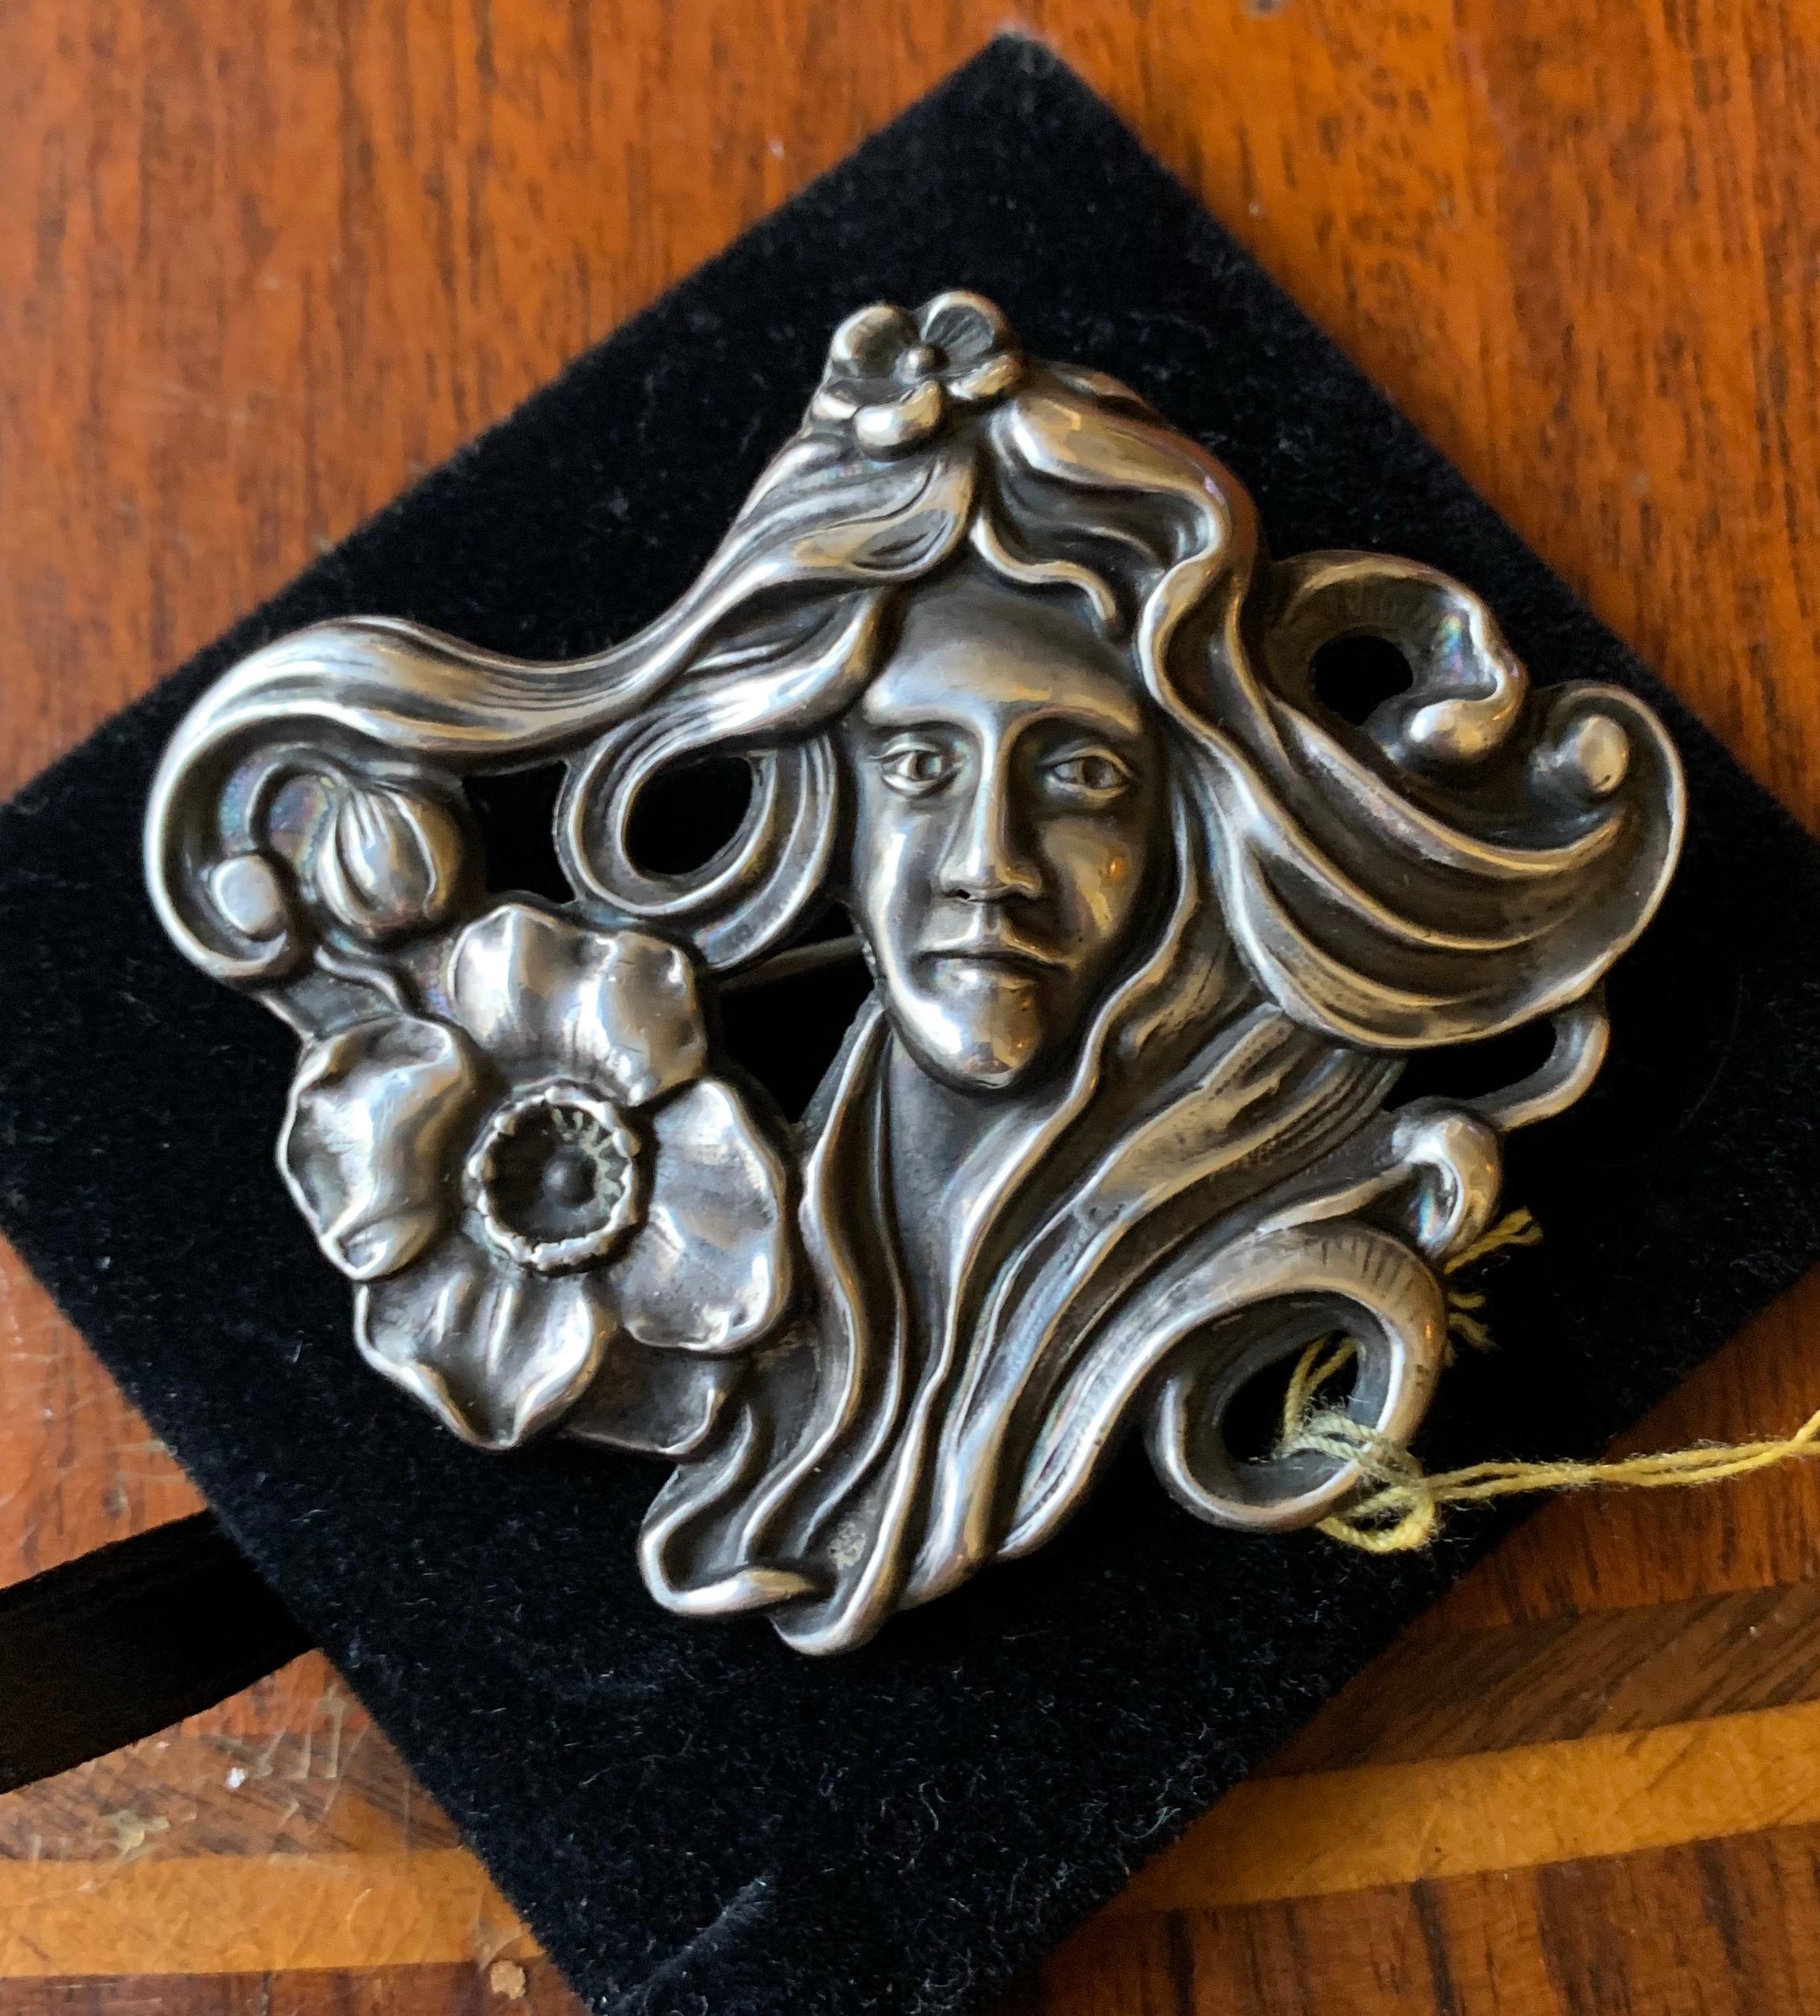 This is a stunning Sterling Silver Art Nouveau Brooch in the form of a Maiden Woman with extraordinary flowing hair encircling her face adorned with gorgeous flowers and buds.  The brooch dates to the Belle Epoque - Art Nouveau period, circa 1880 -